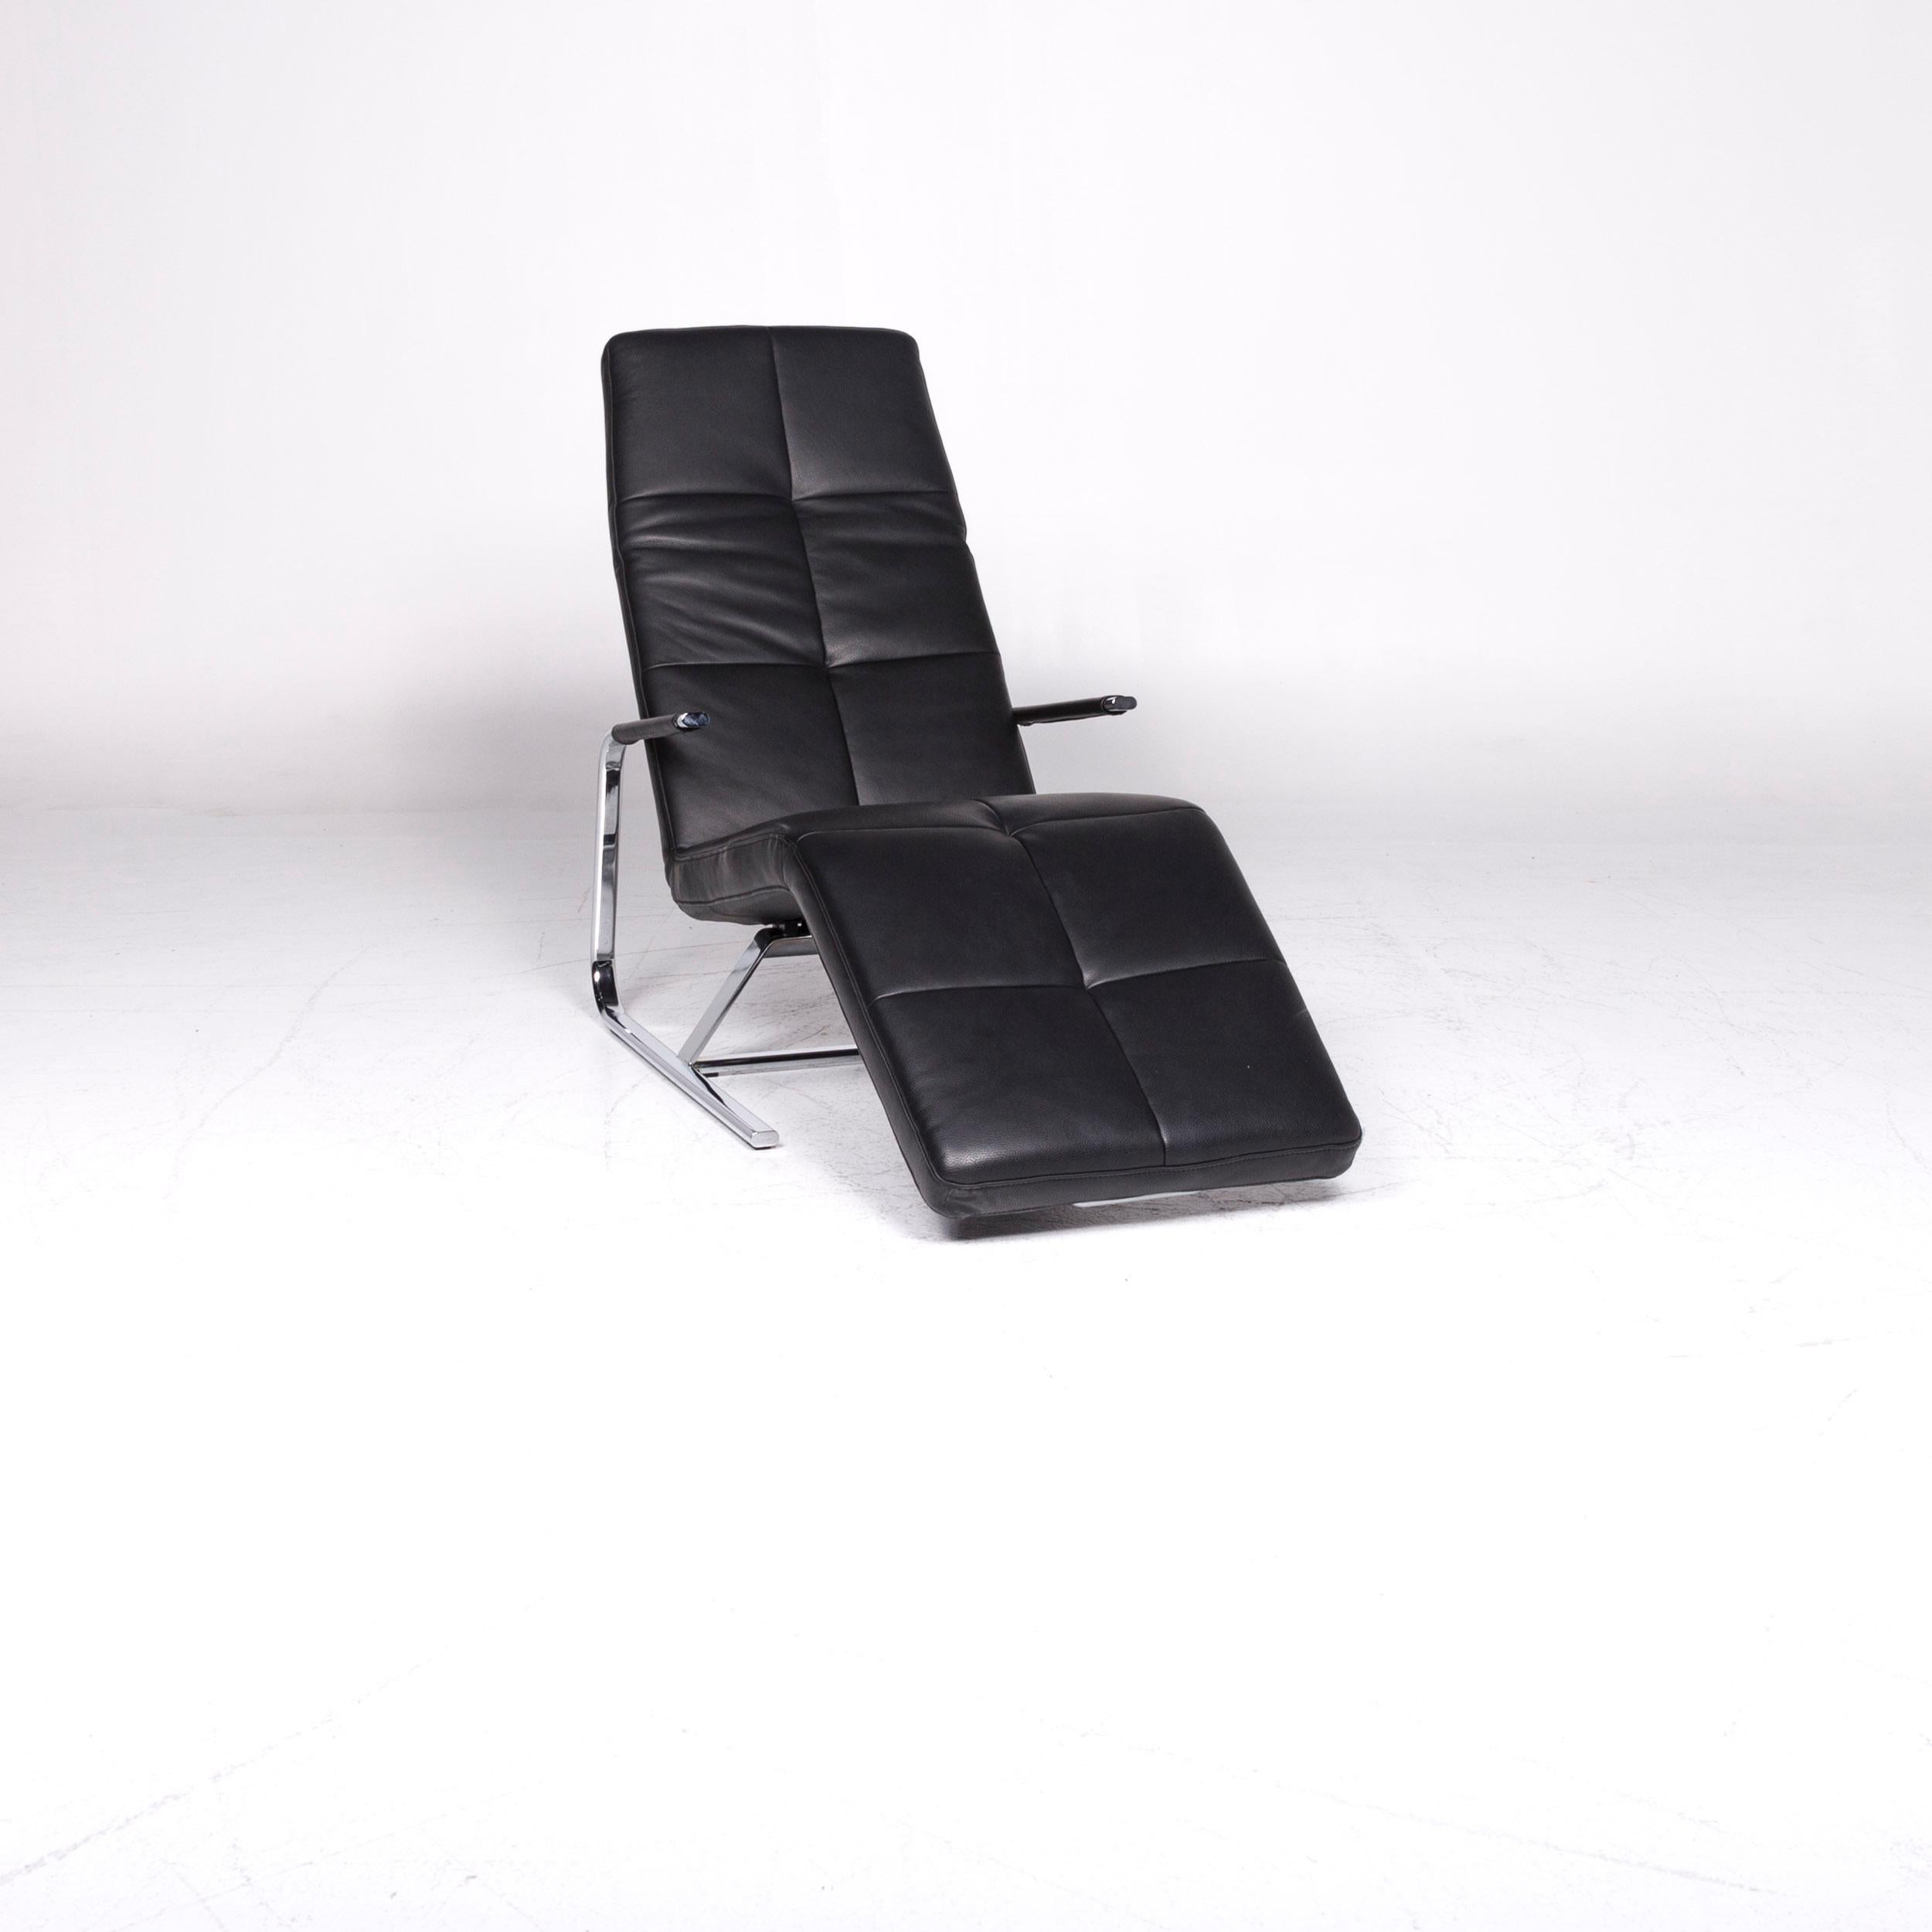 We bring to you an Ewald Schillig VITA designer leather lounger black relax function.

 
 Product measurements in centimeters:
 
 Depth 157
Width 71
Height 107
Seat-height 44
Rest-height 53
Seat-depth 65
Seat-width 60
Back-height 75.